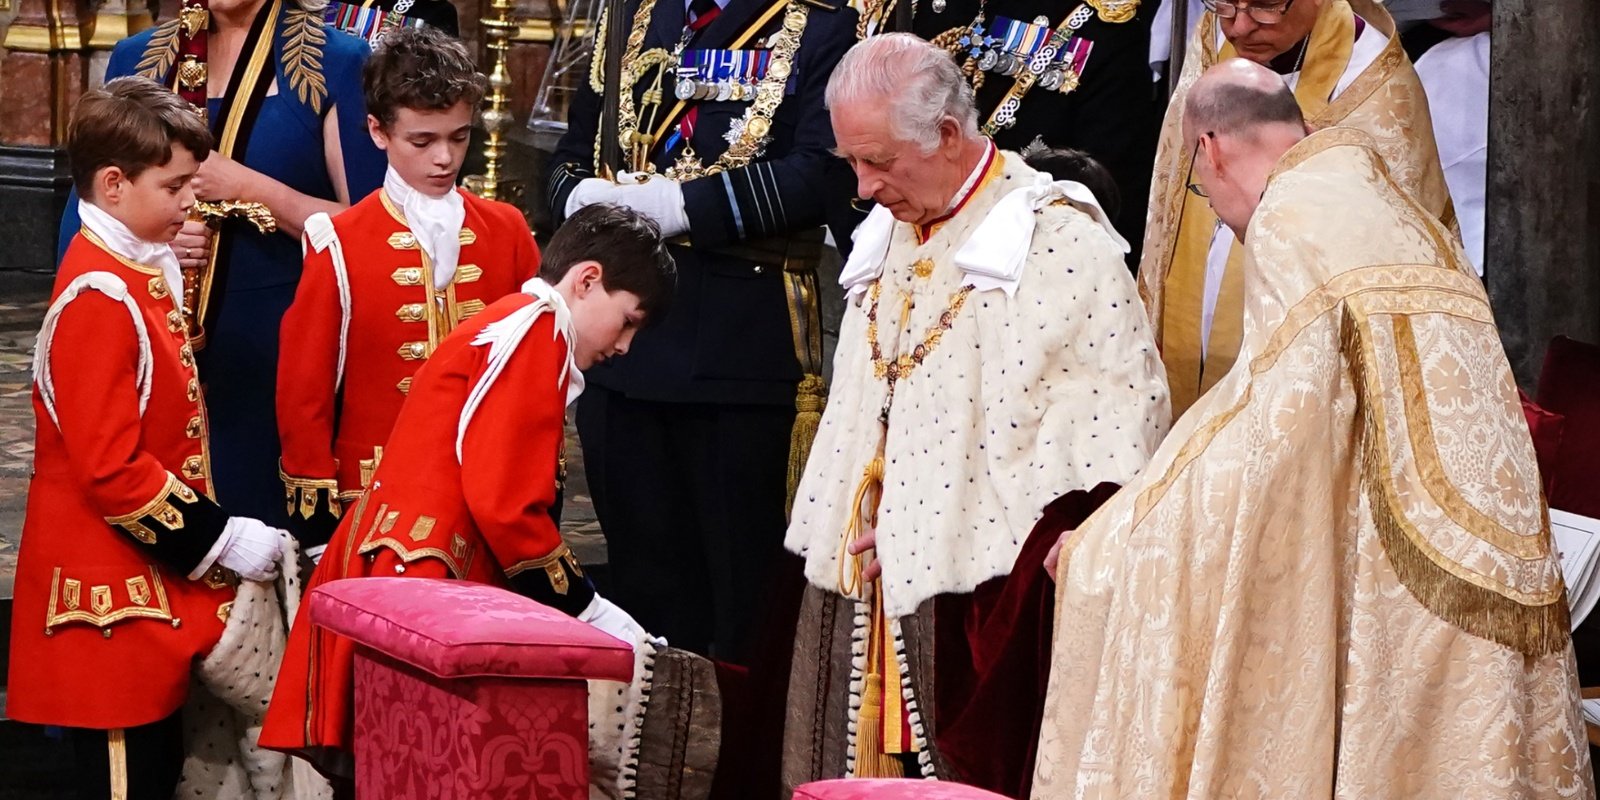 Prince George served as a coronation page at King Charles' coronation.